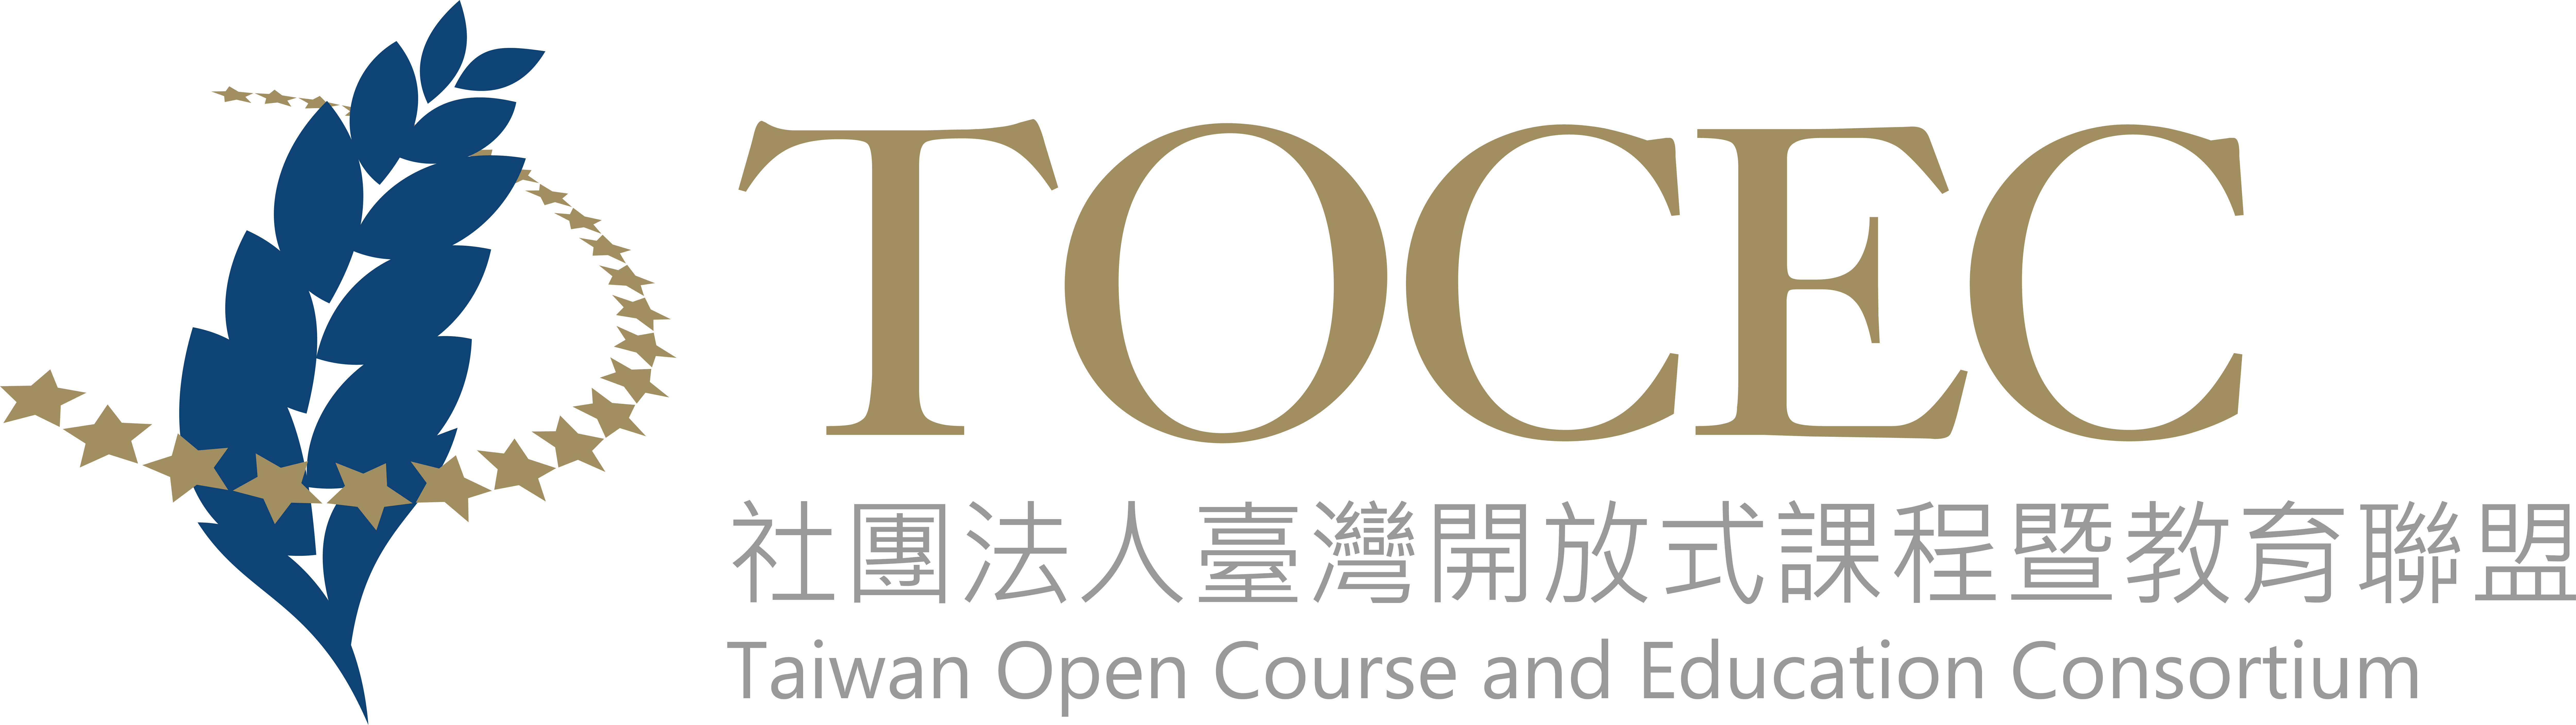 Logo of Taiwan Open Course and Education Consortium (TOCEC)